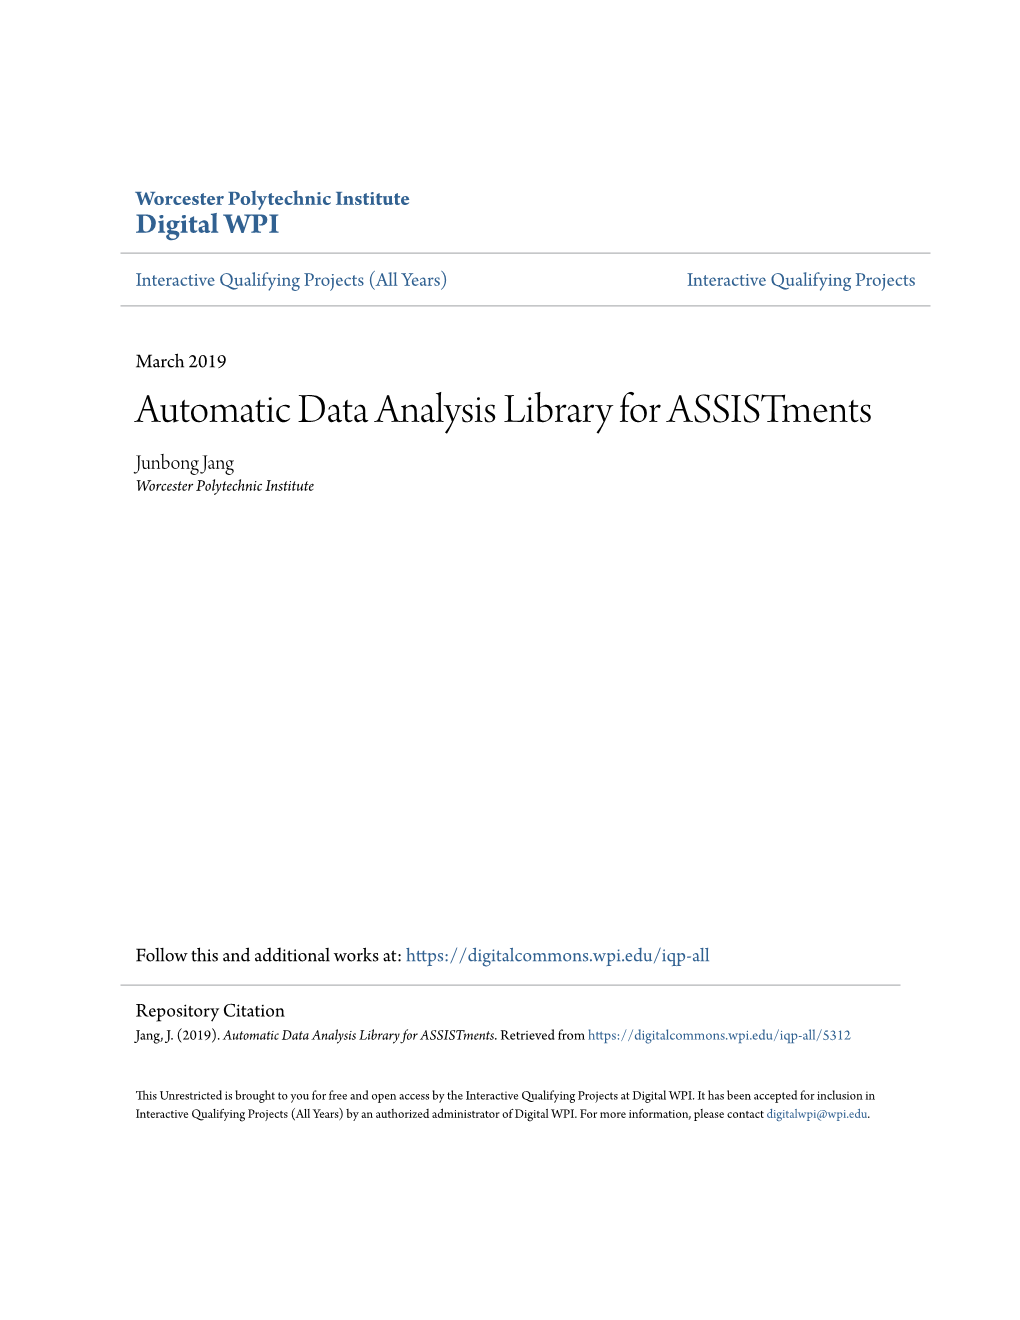 Automatic Data Analysis Library for Assistments Junbong Jang Worcester Polytechnic Institute